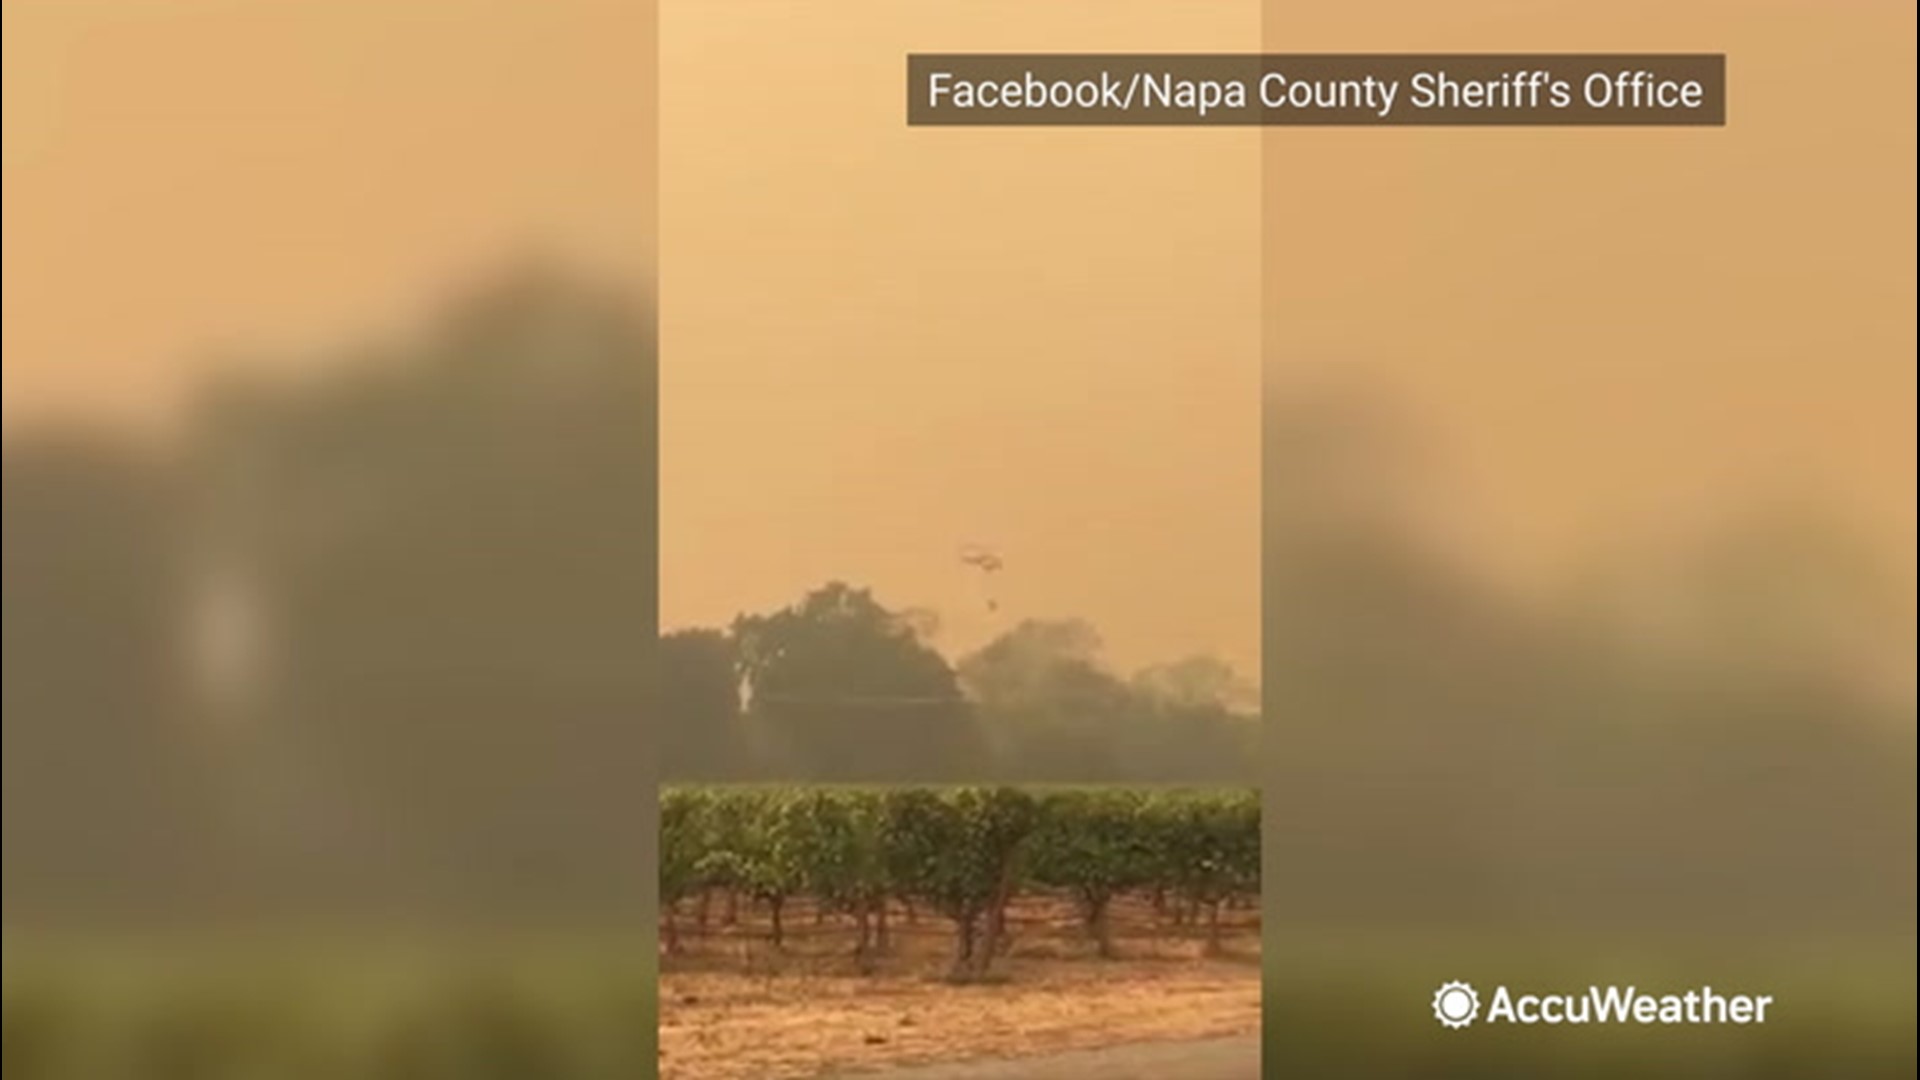 Videos shared by the Napa County Sheriff's Office show emergency crews battling the Glass Fire from the air in Napa County, California, on Sept. 28.